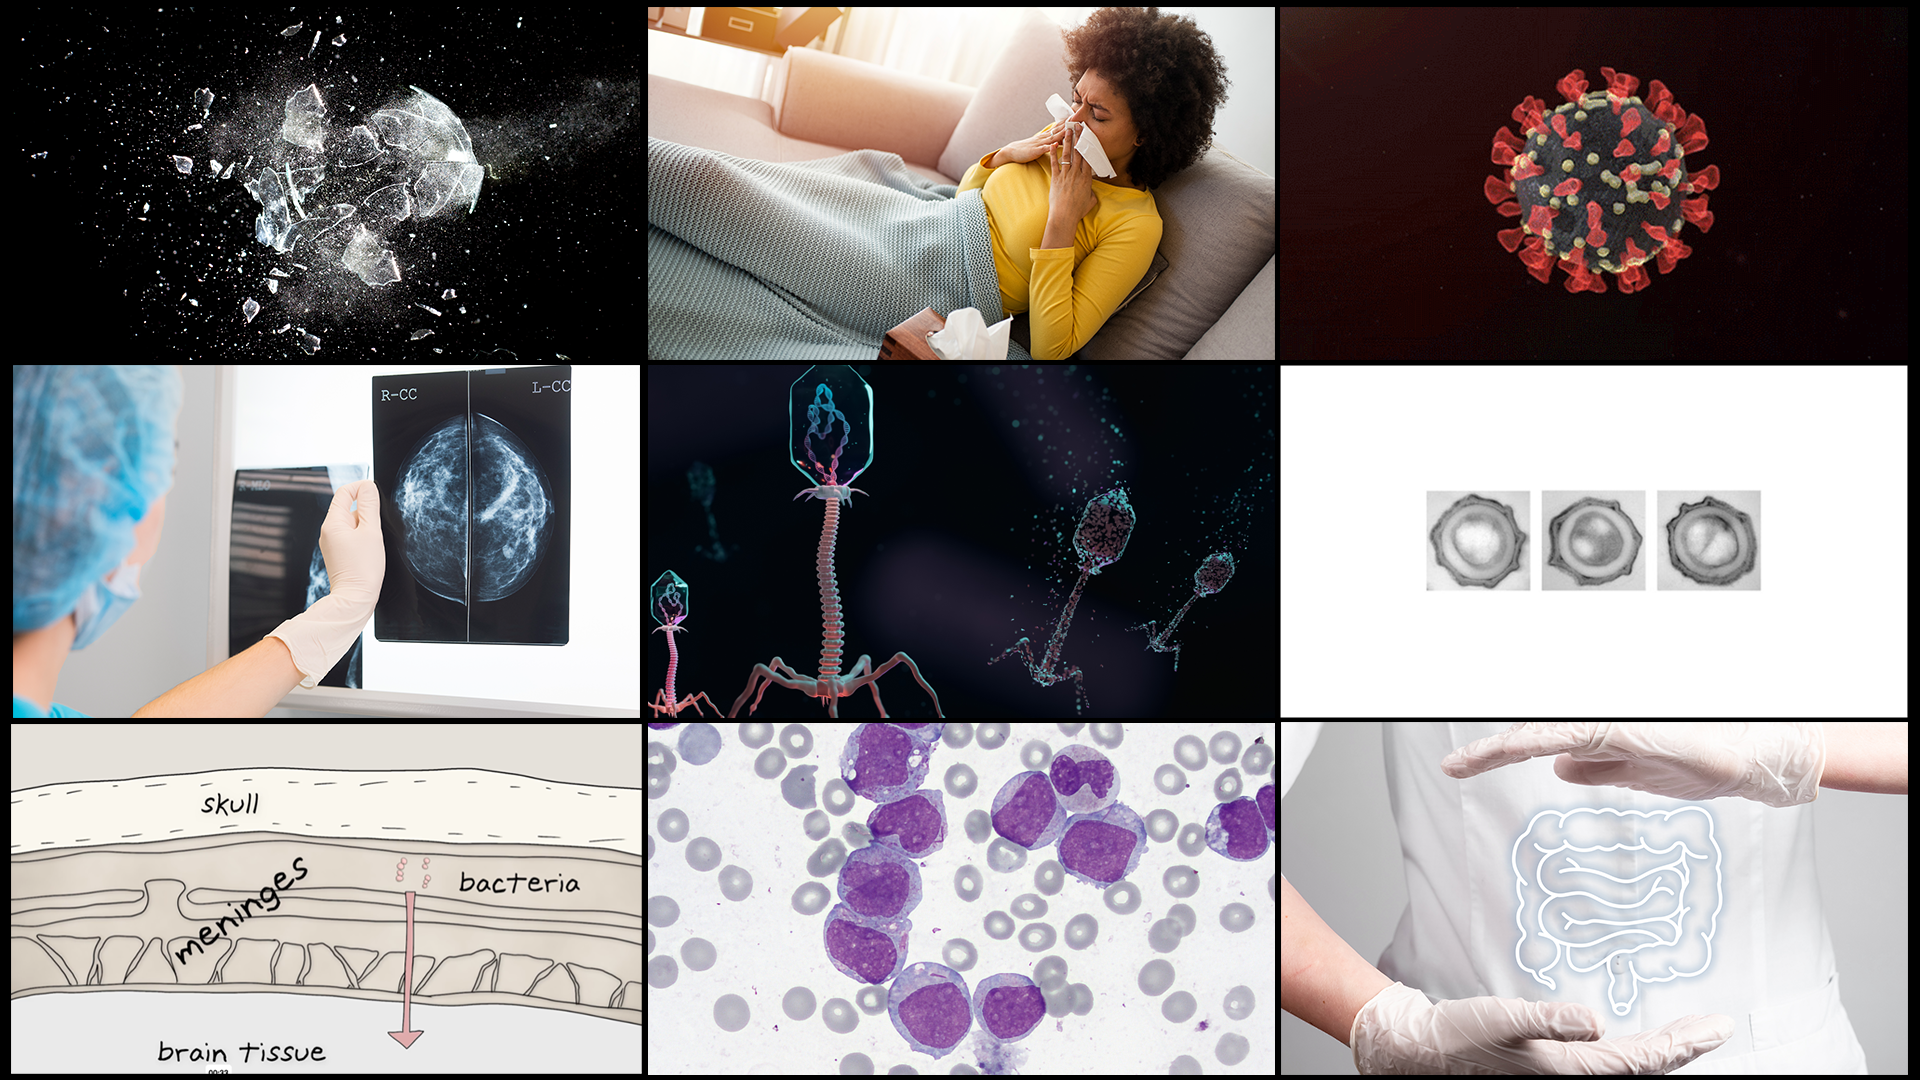 A grid of nine images, including breaking glass, a woman blowing her nose, a SARS-CoV-2 particle, illustration of phage viruses, microscopy images of bacterial spores, and an illustration of the meninges